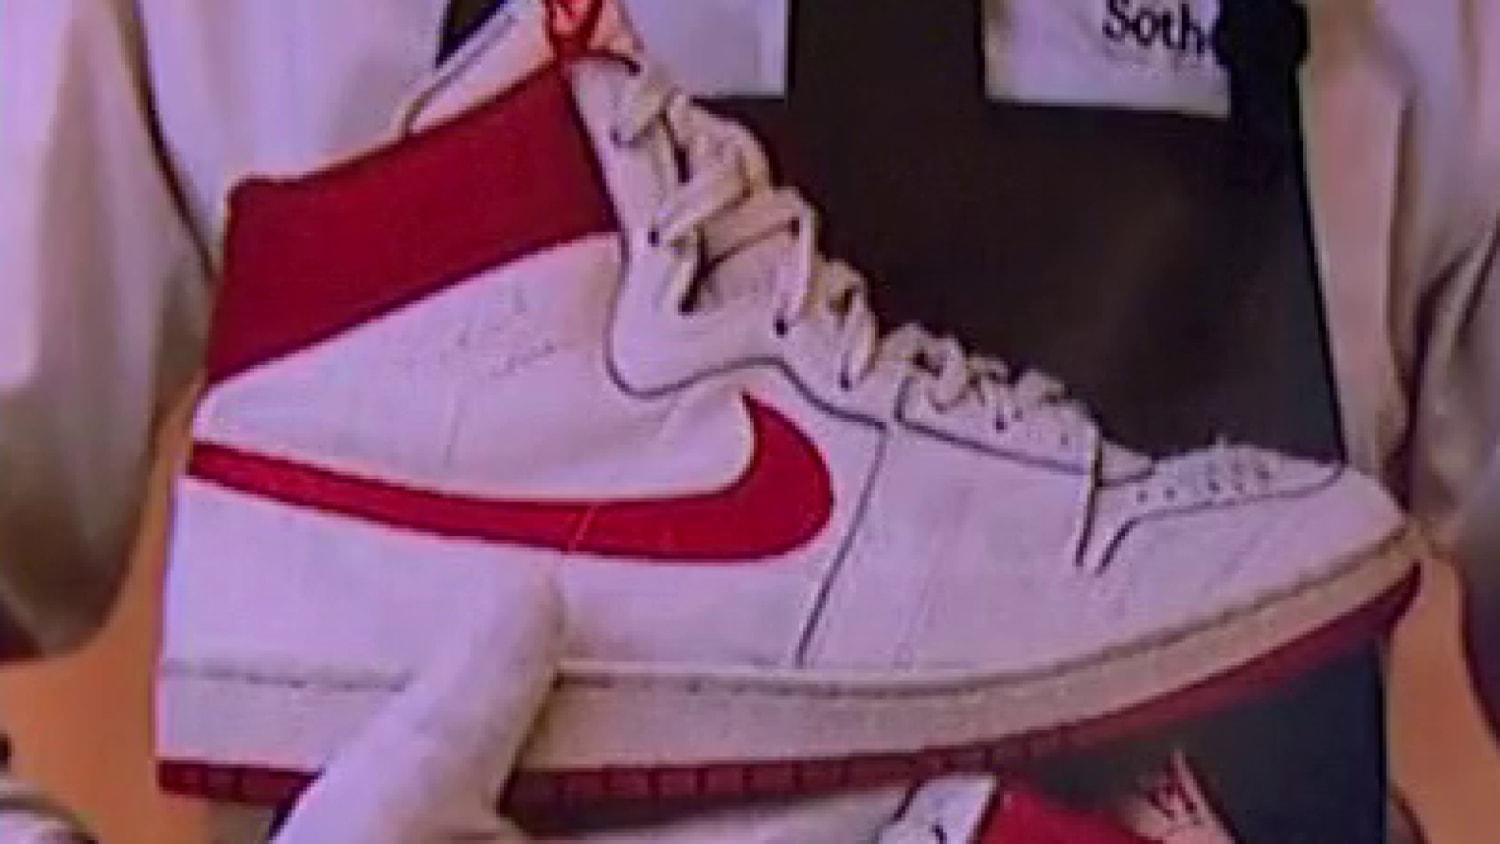 Michael Jordan's 1984 Nike Air Ships sell for record at Sotheby's